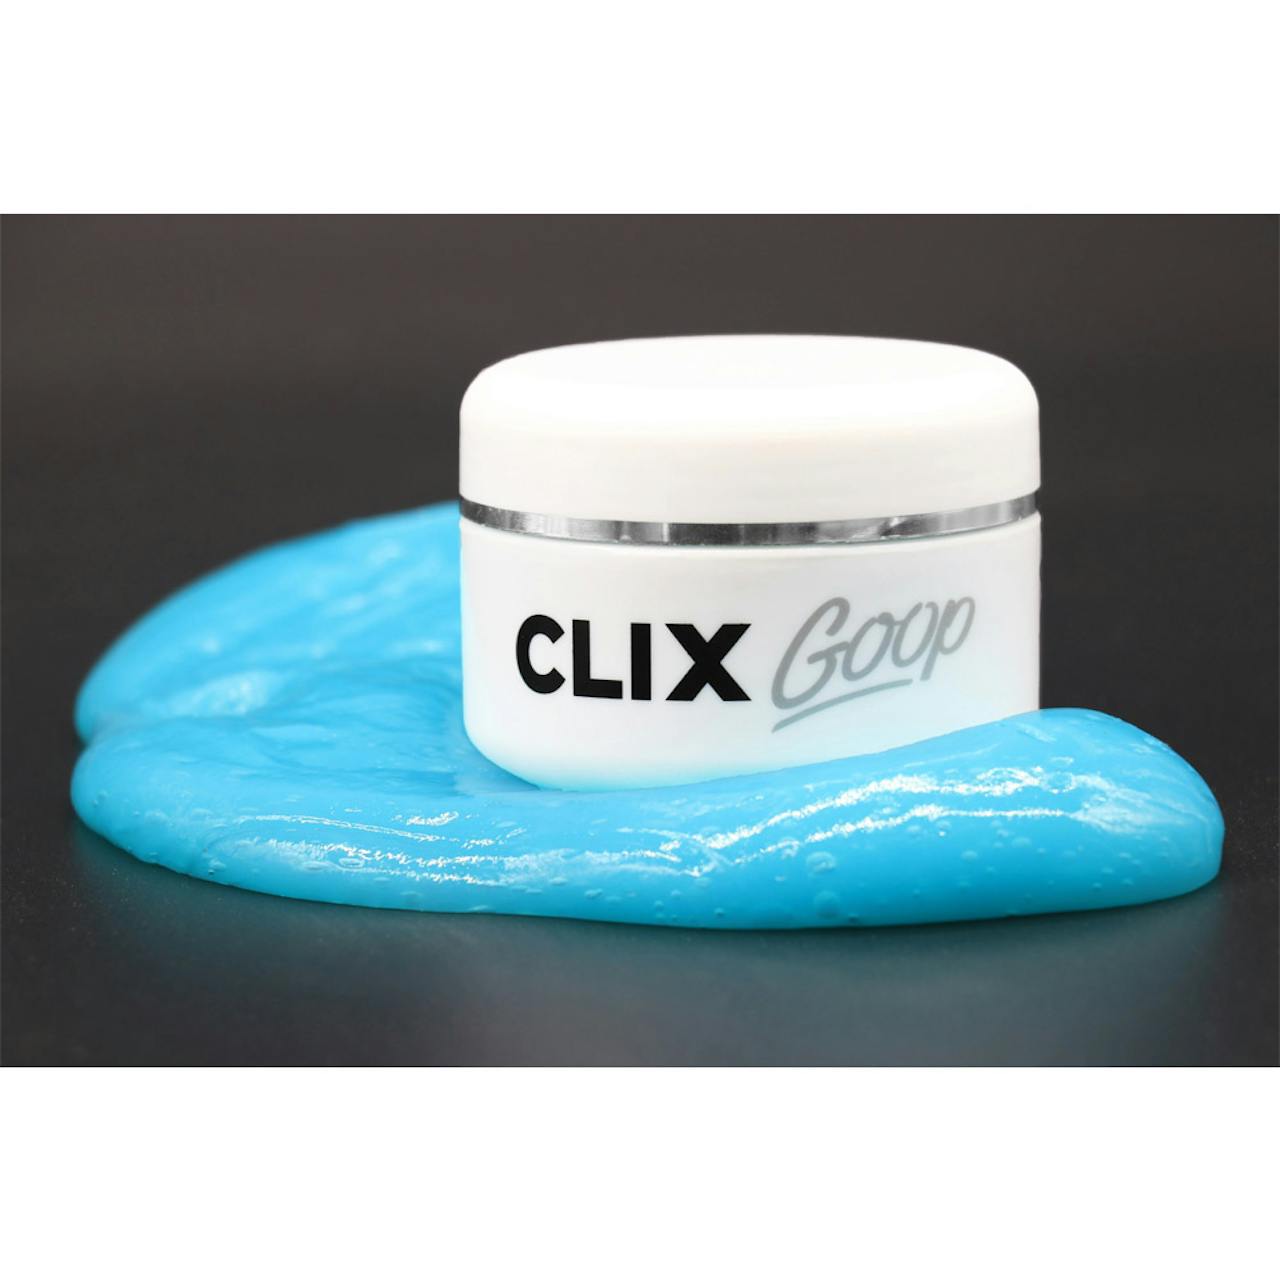 CLIX Goop - Car Cleaning Gel, Cleans Hard to Reach Places Like Vents,  Cupholders, Center Consoles, and More. Perfect for Car, Home, Office, and  Gifts! (1 Pack): : Tools & Home Improvement